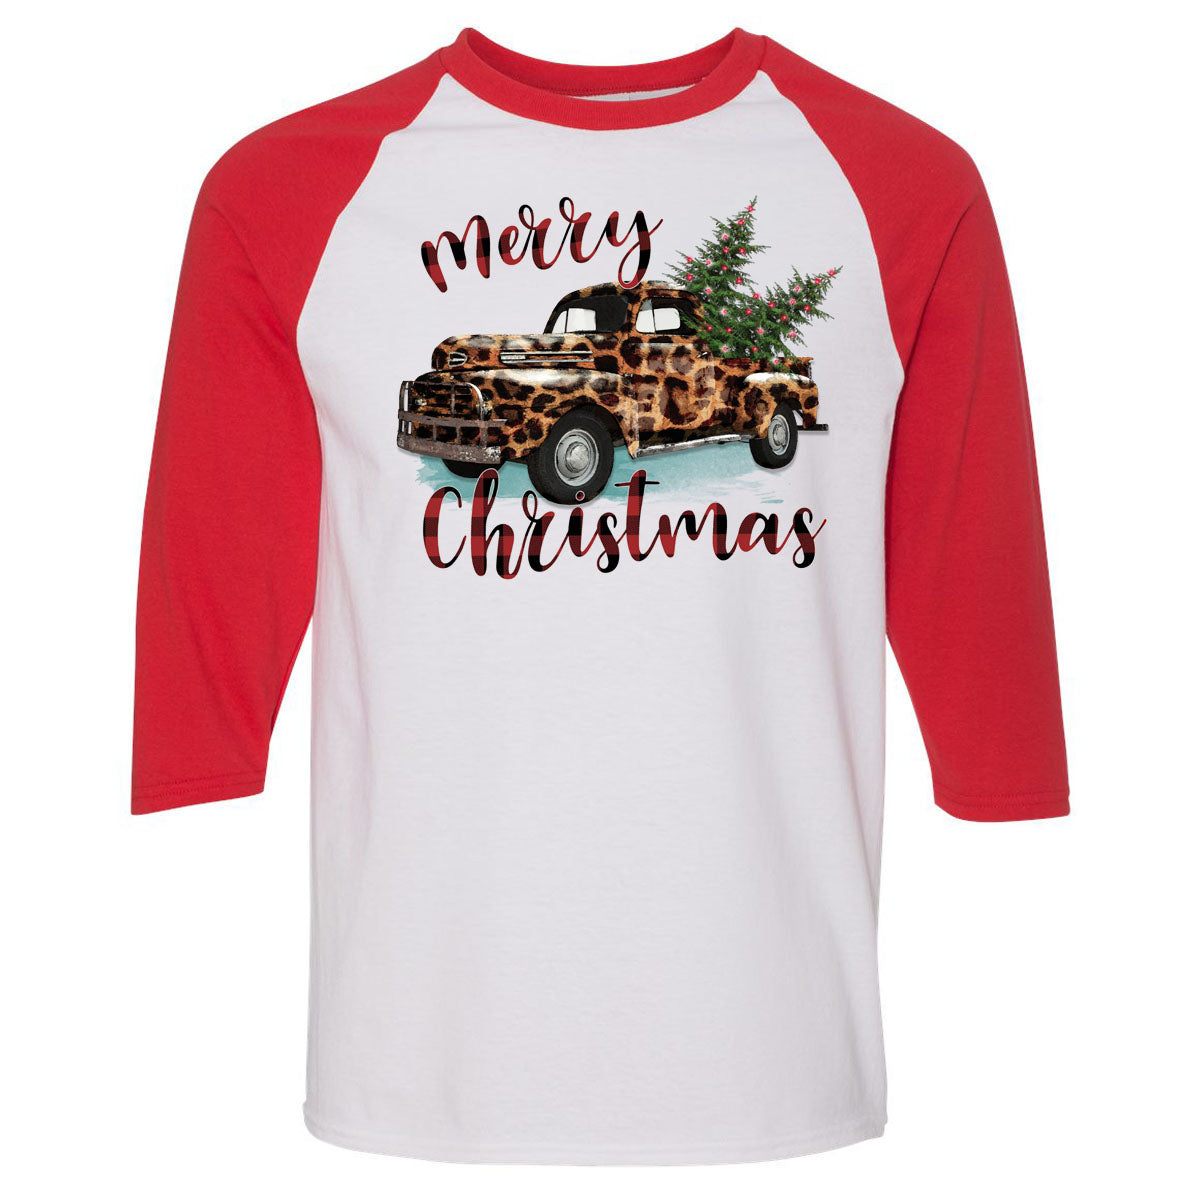 Merry Christmas Leopard Truck Tee - Southern Grace Creations